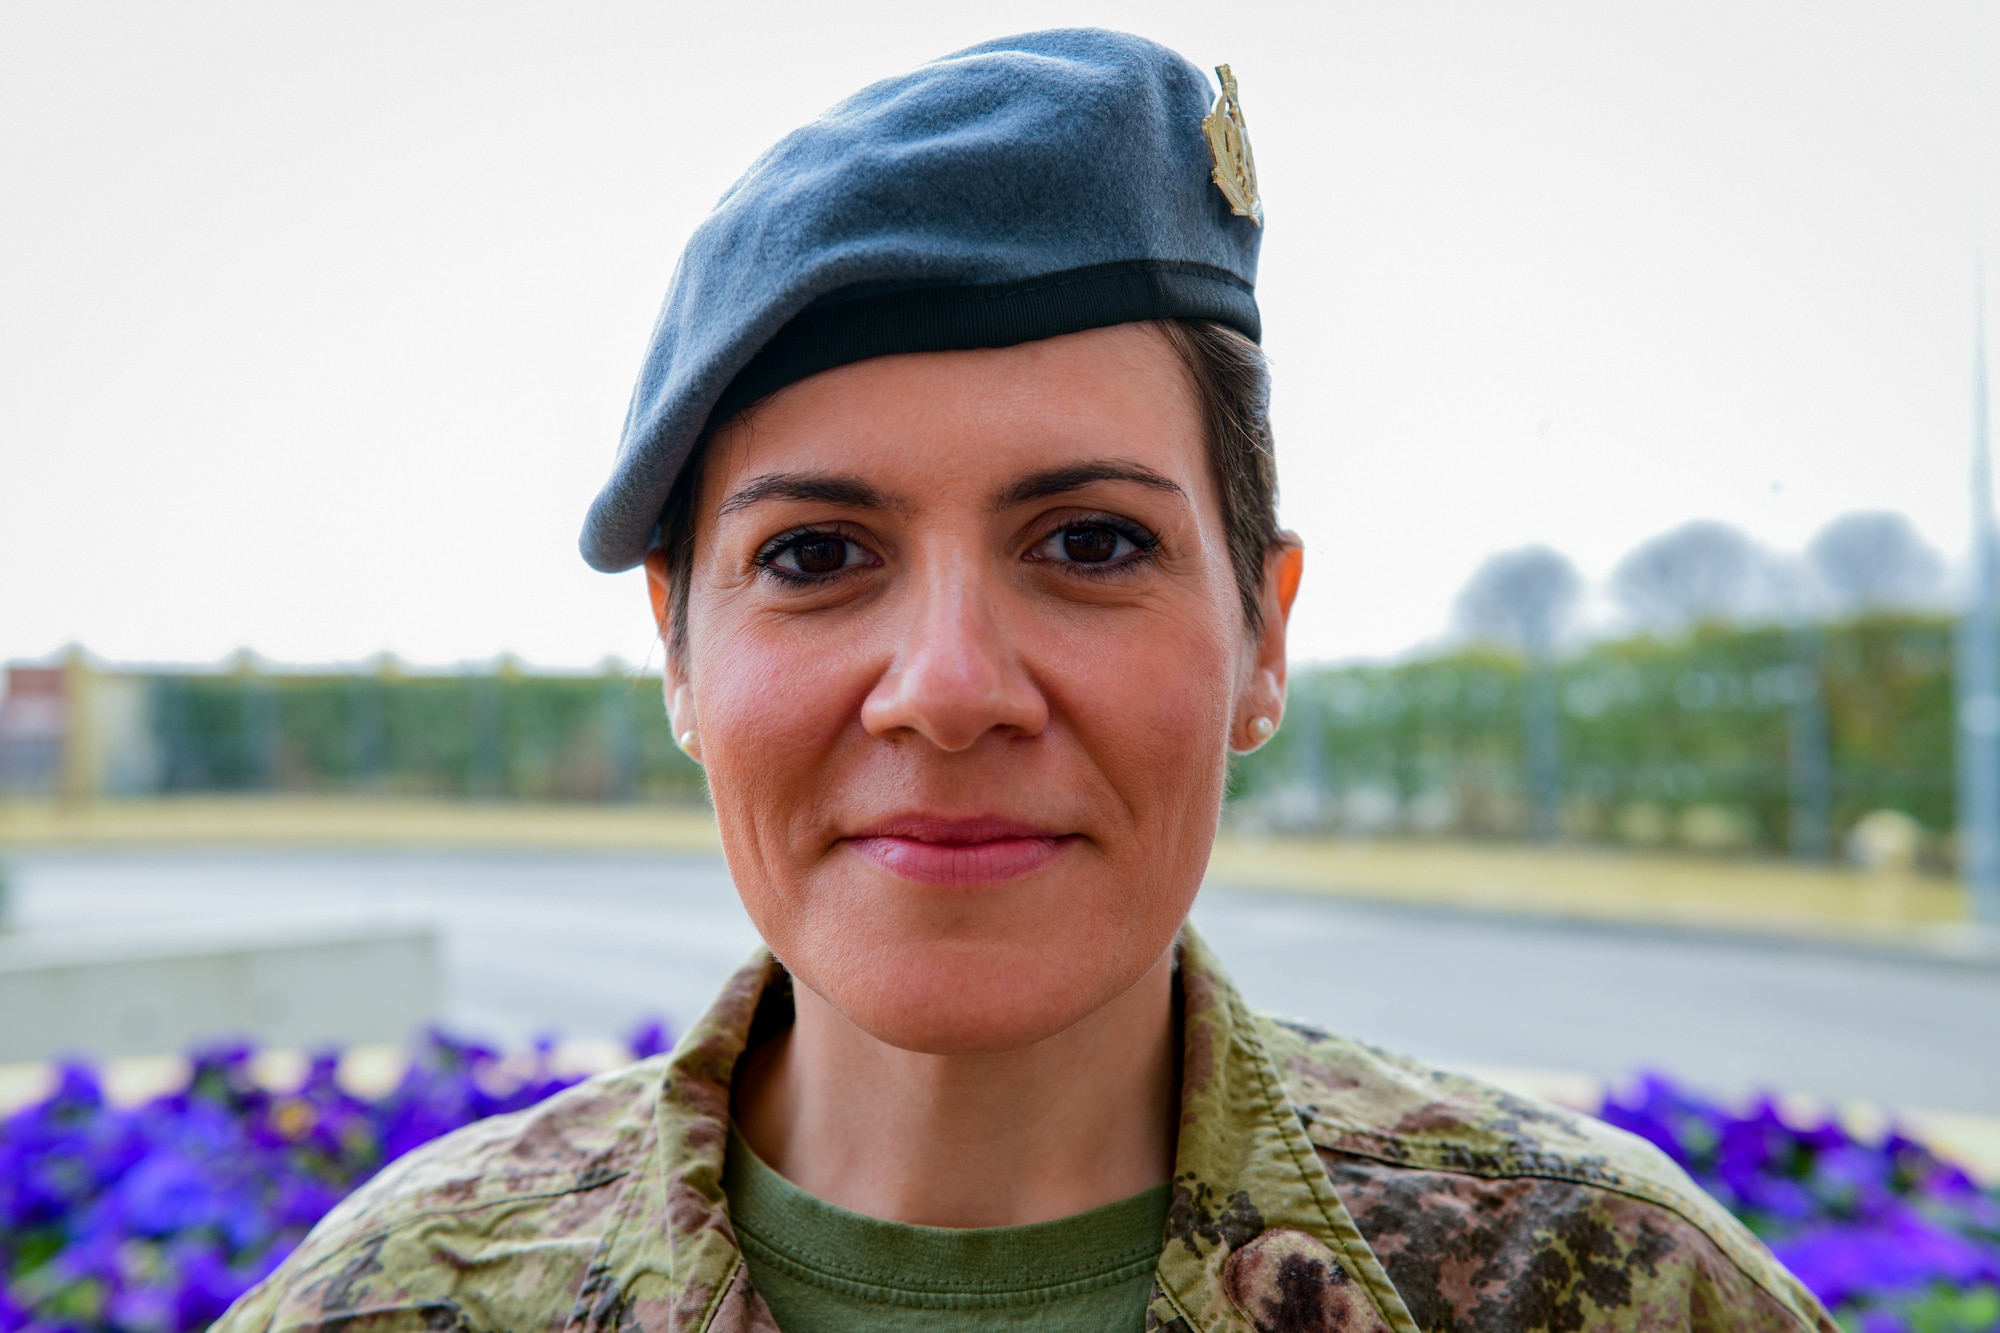 Italian air force Senior Airman Monica Dell’Aquila, Italian air force Security Forces Squadron force protection operator, poses for a photo at Aviano Air Base, Italy, March 16, 2022. Dell’Aquila enlisted in the Italian air force March 17, 2008, and was first stationed in Rome before arriving to Aviano Air Base in 2013. Women’s History Month highlights the accomplishments and contributions of women to events in history and contemporary society. (U.S. Air Force photo by Senior Airman Brooke Moeder)